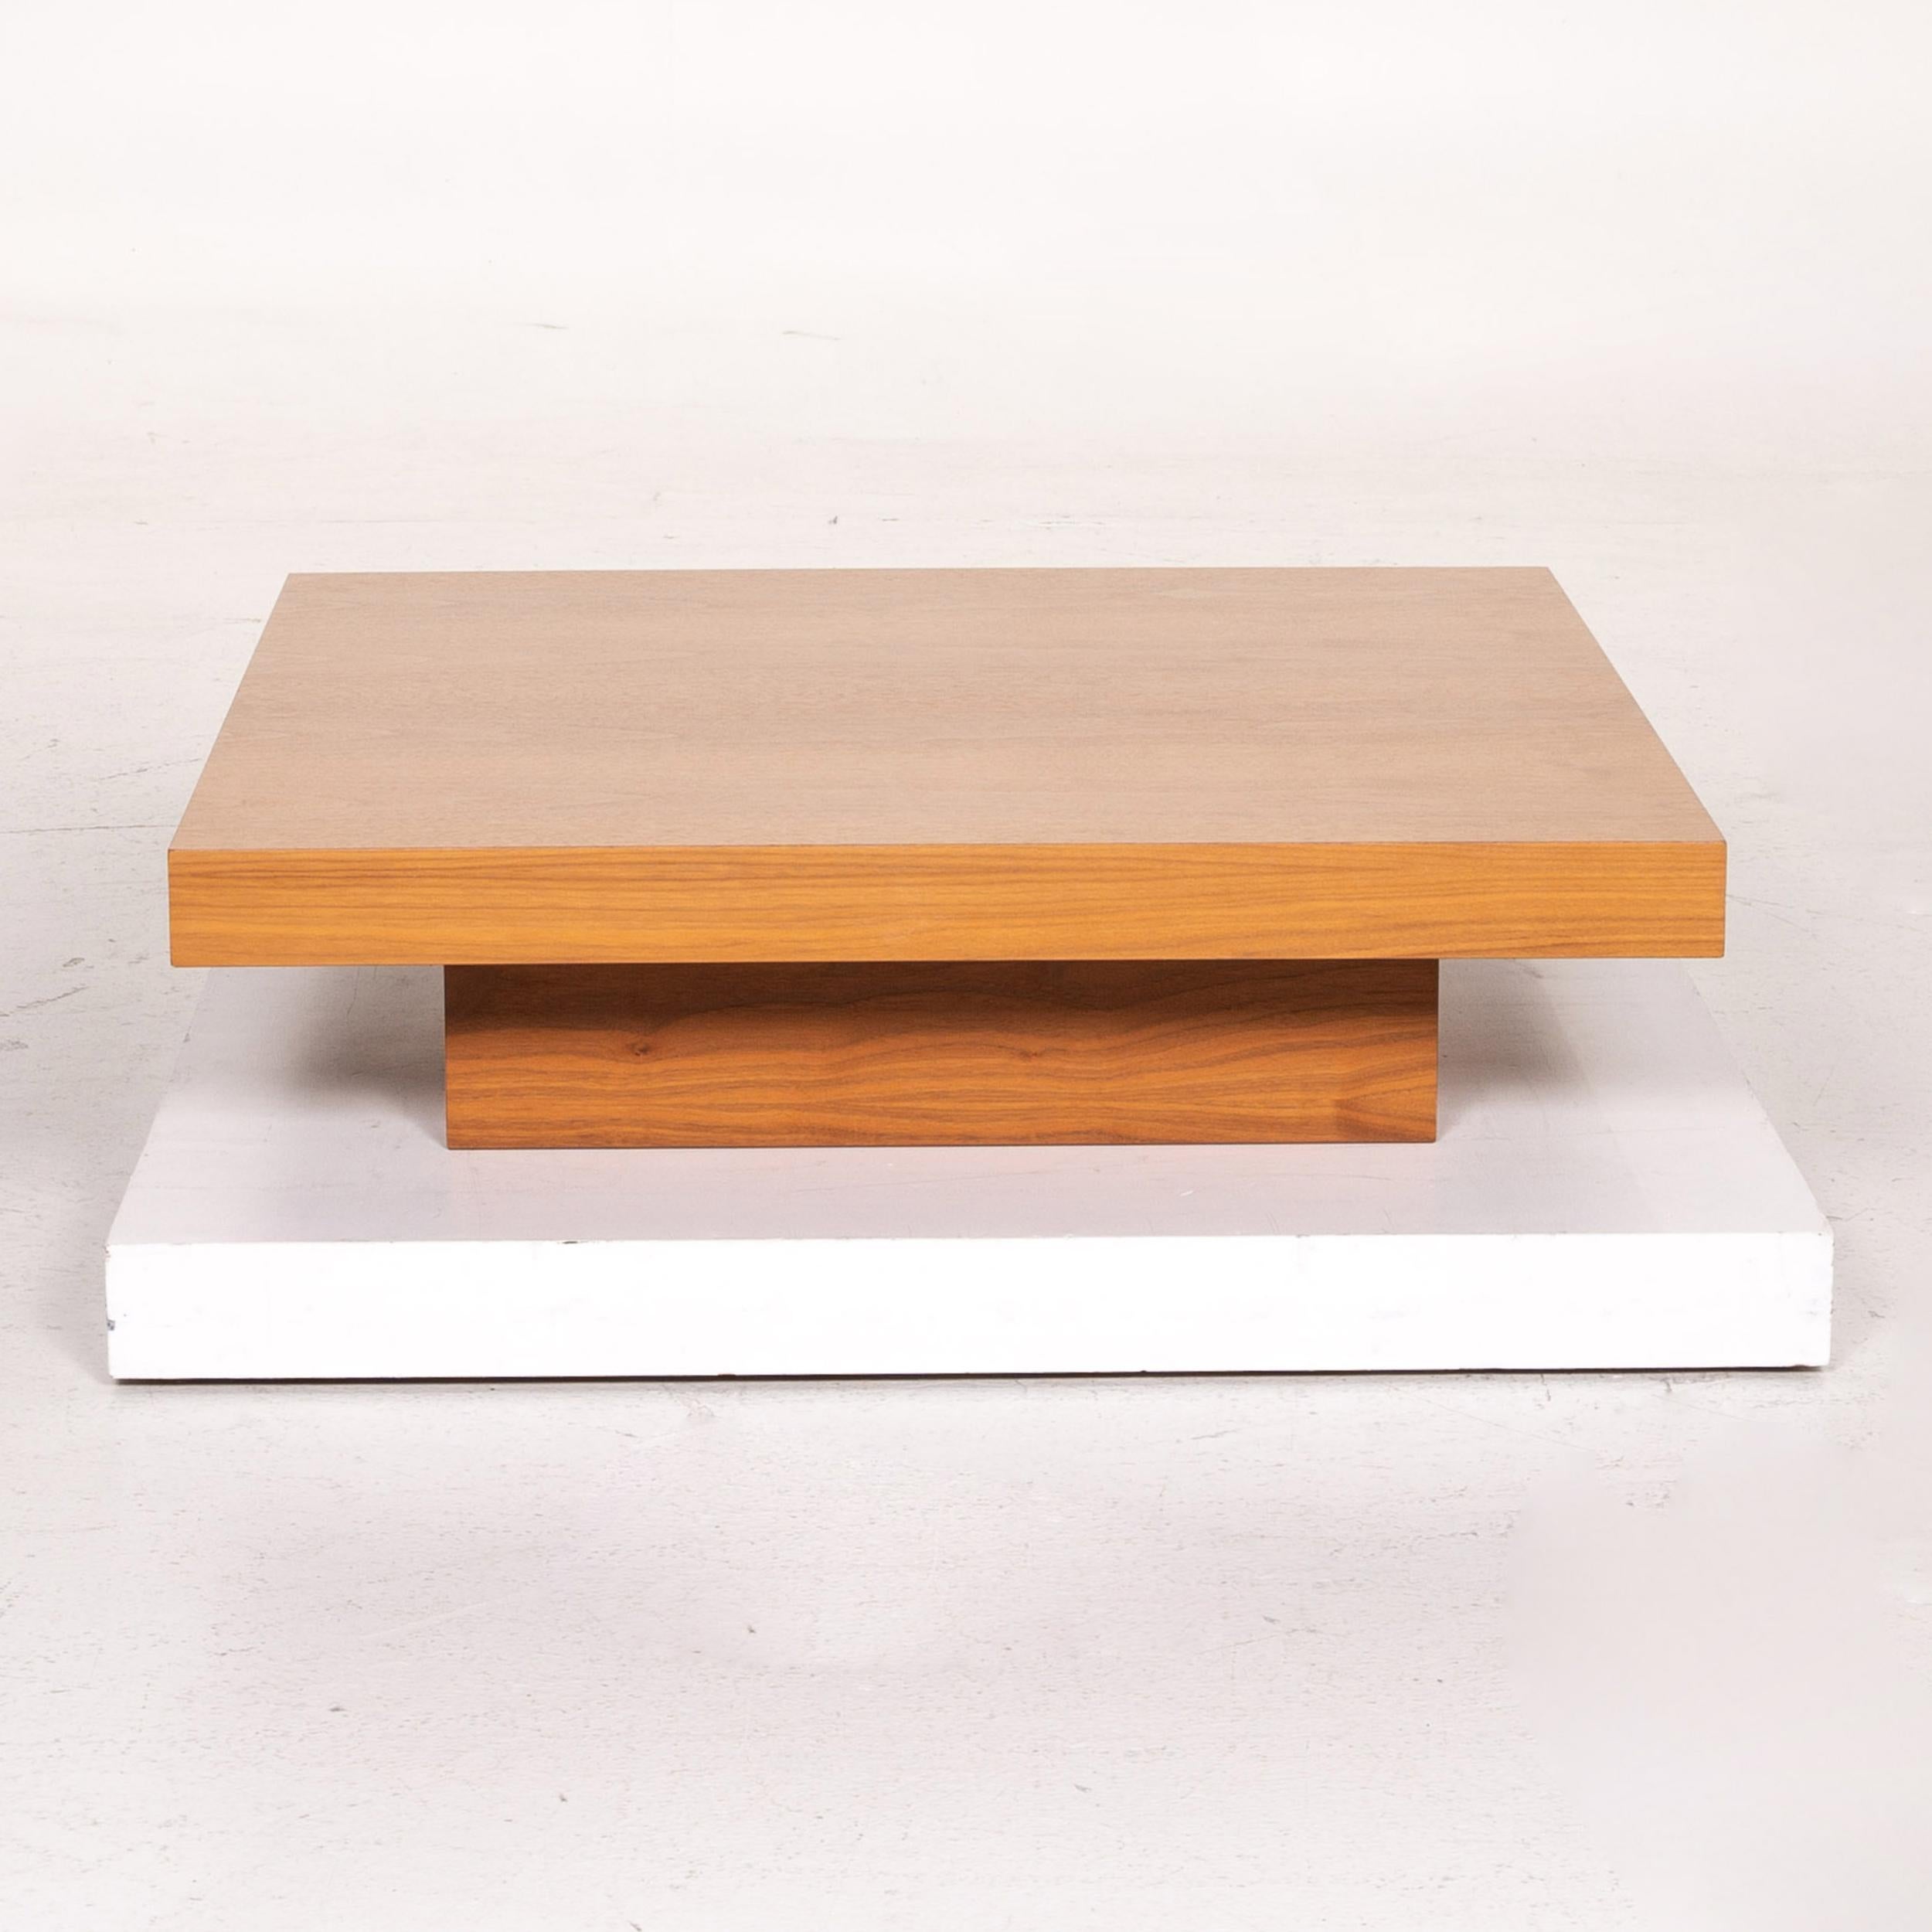 Contemporary Ewald Schillig Wood Coffee Table Brown Table For Sale